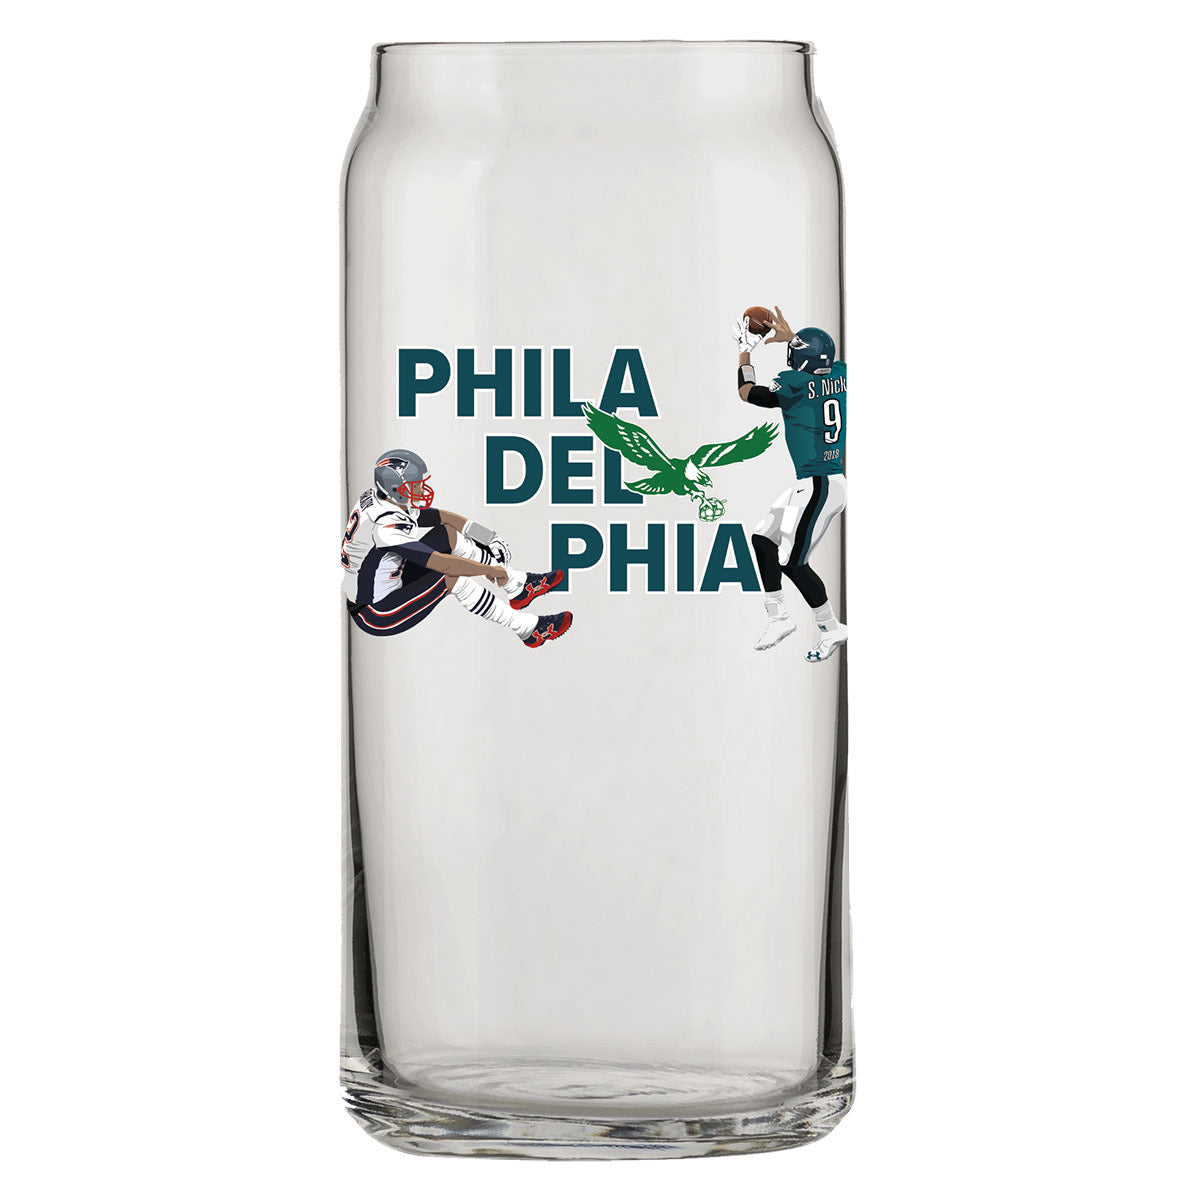 A Philly Special Christmas Special' premieres on  for